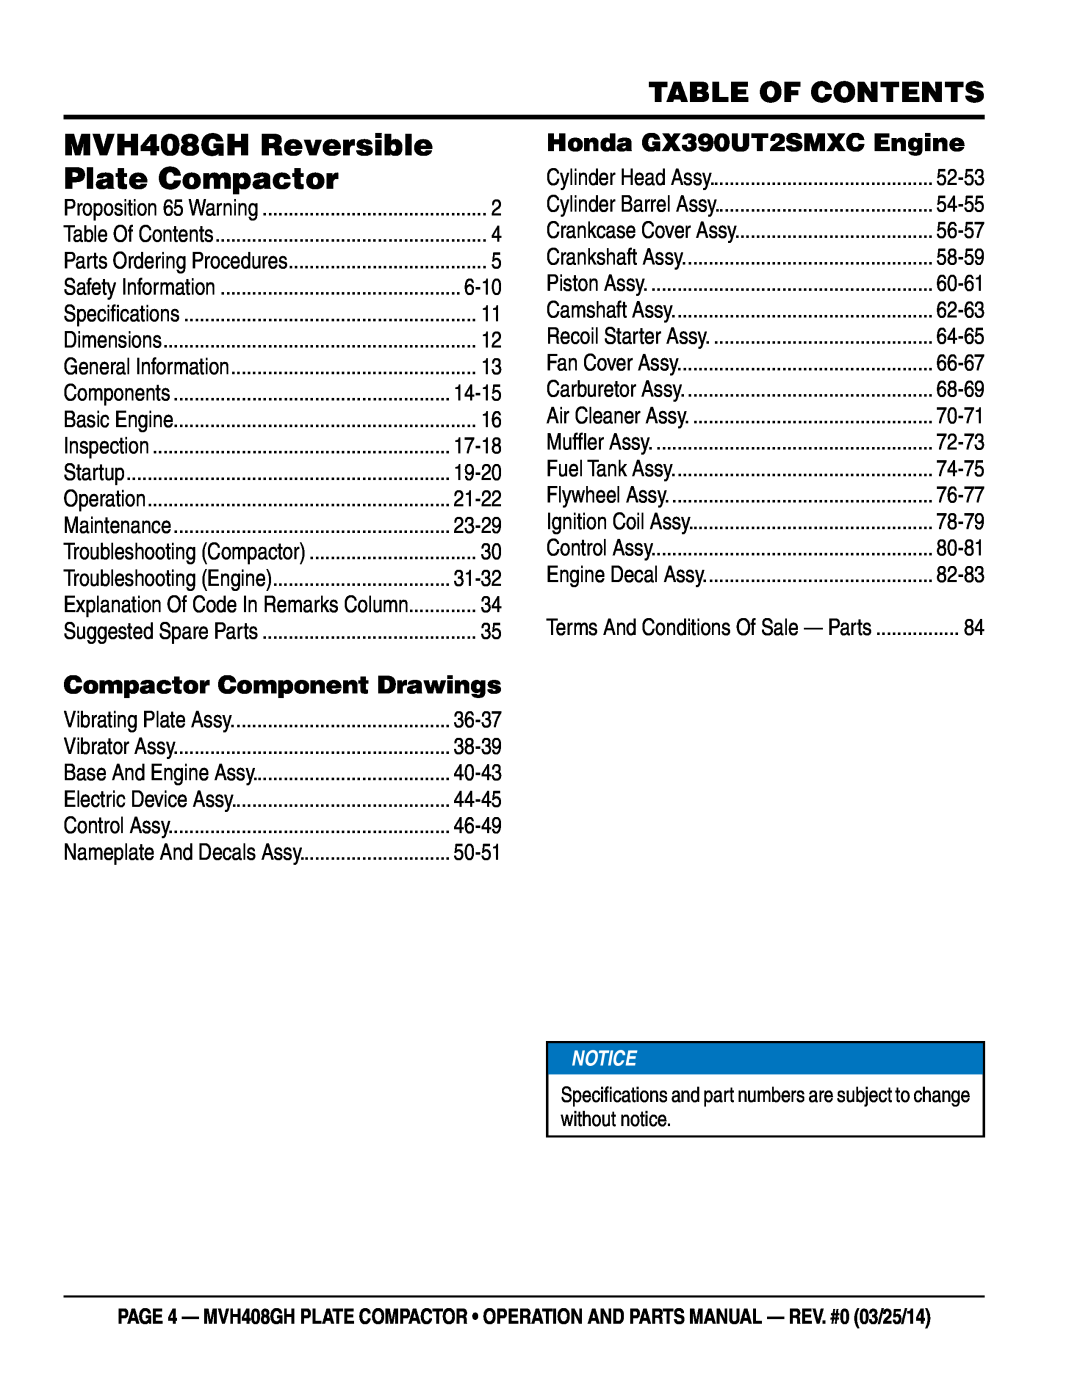 Multiquip manual Table Of Contents, Compactor Component Drawings, Honda GX390UT2SMXC Engine, MVH408GH Reversible, 6-10 